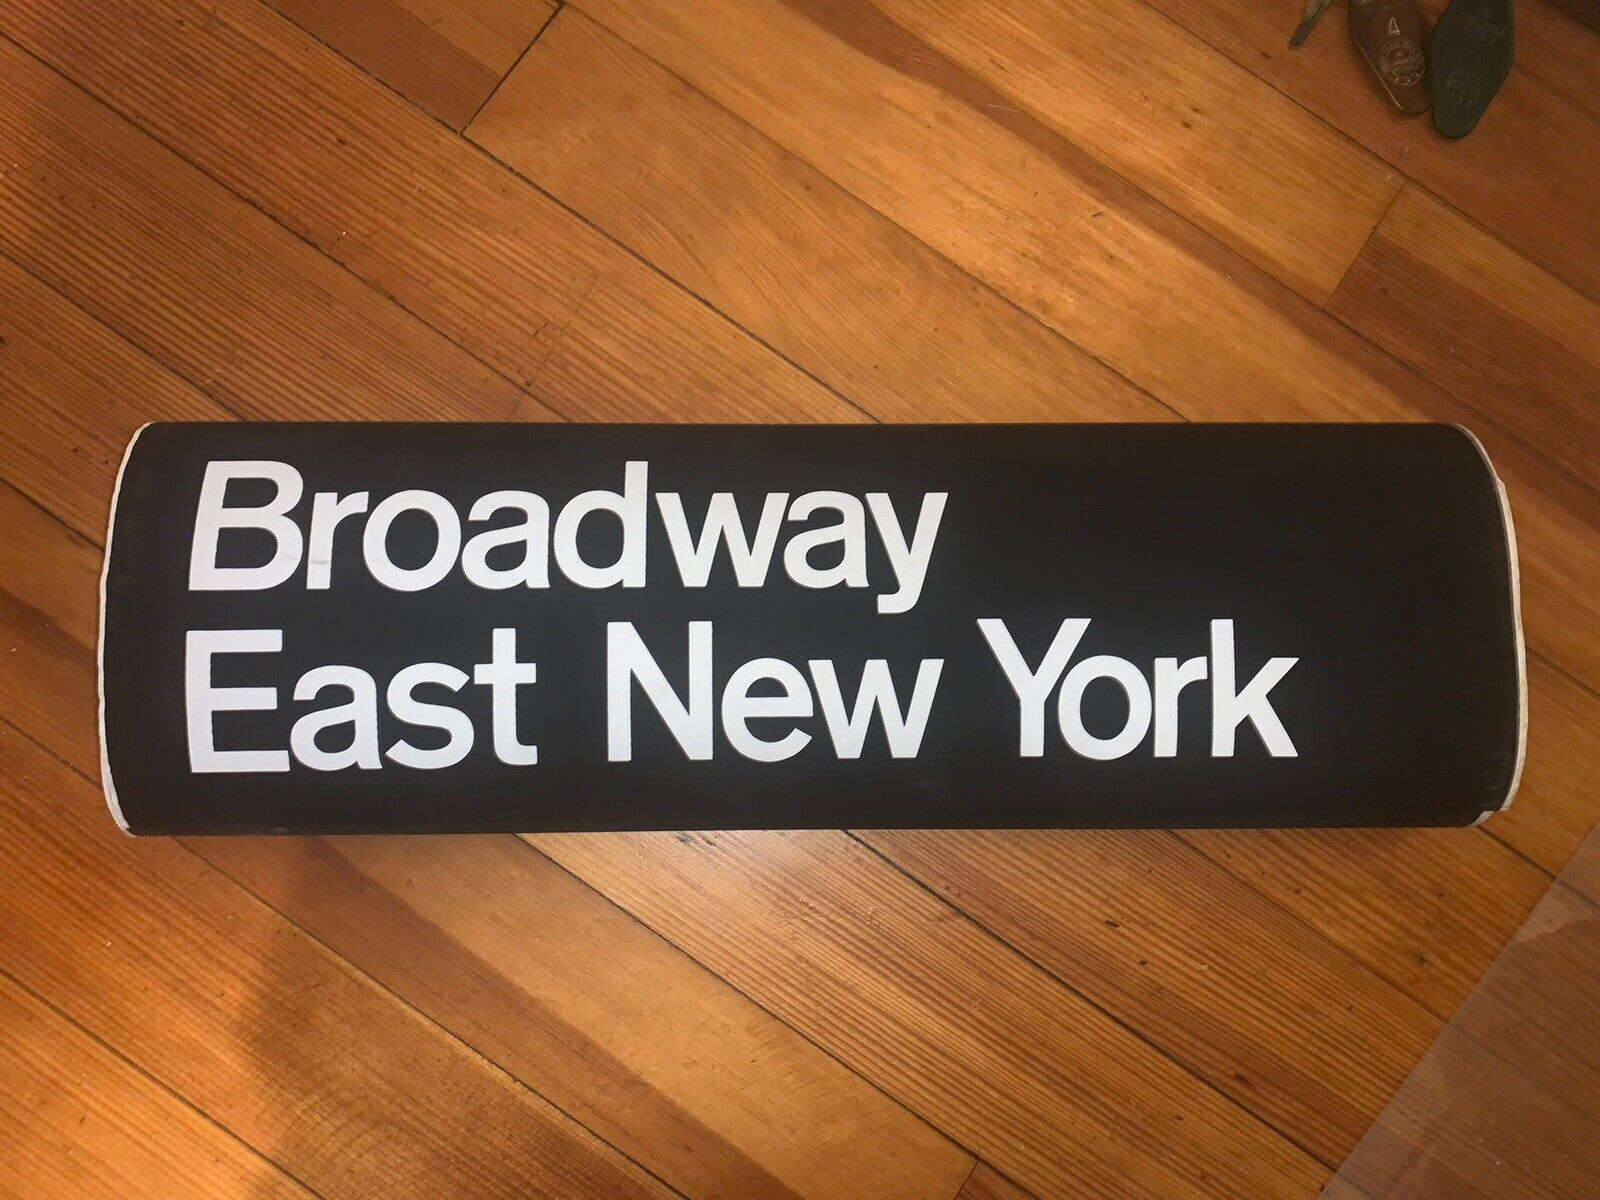 R27/30 NY NYC SUBWAY LARGE ROLL SIGN BROADWAY EAST NEW YORK FULTON CANARSIE BMT